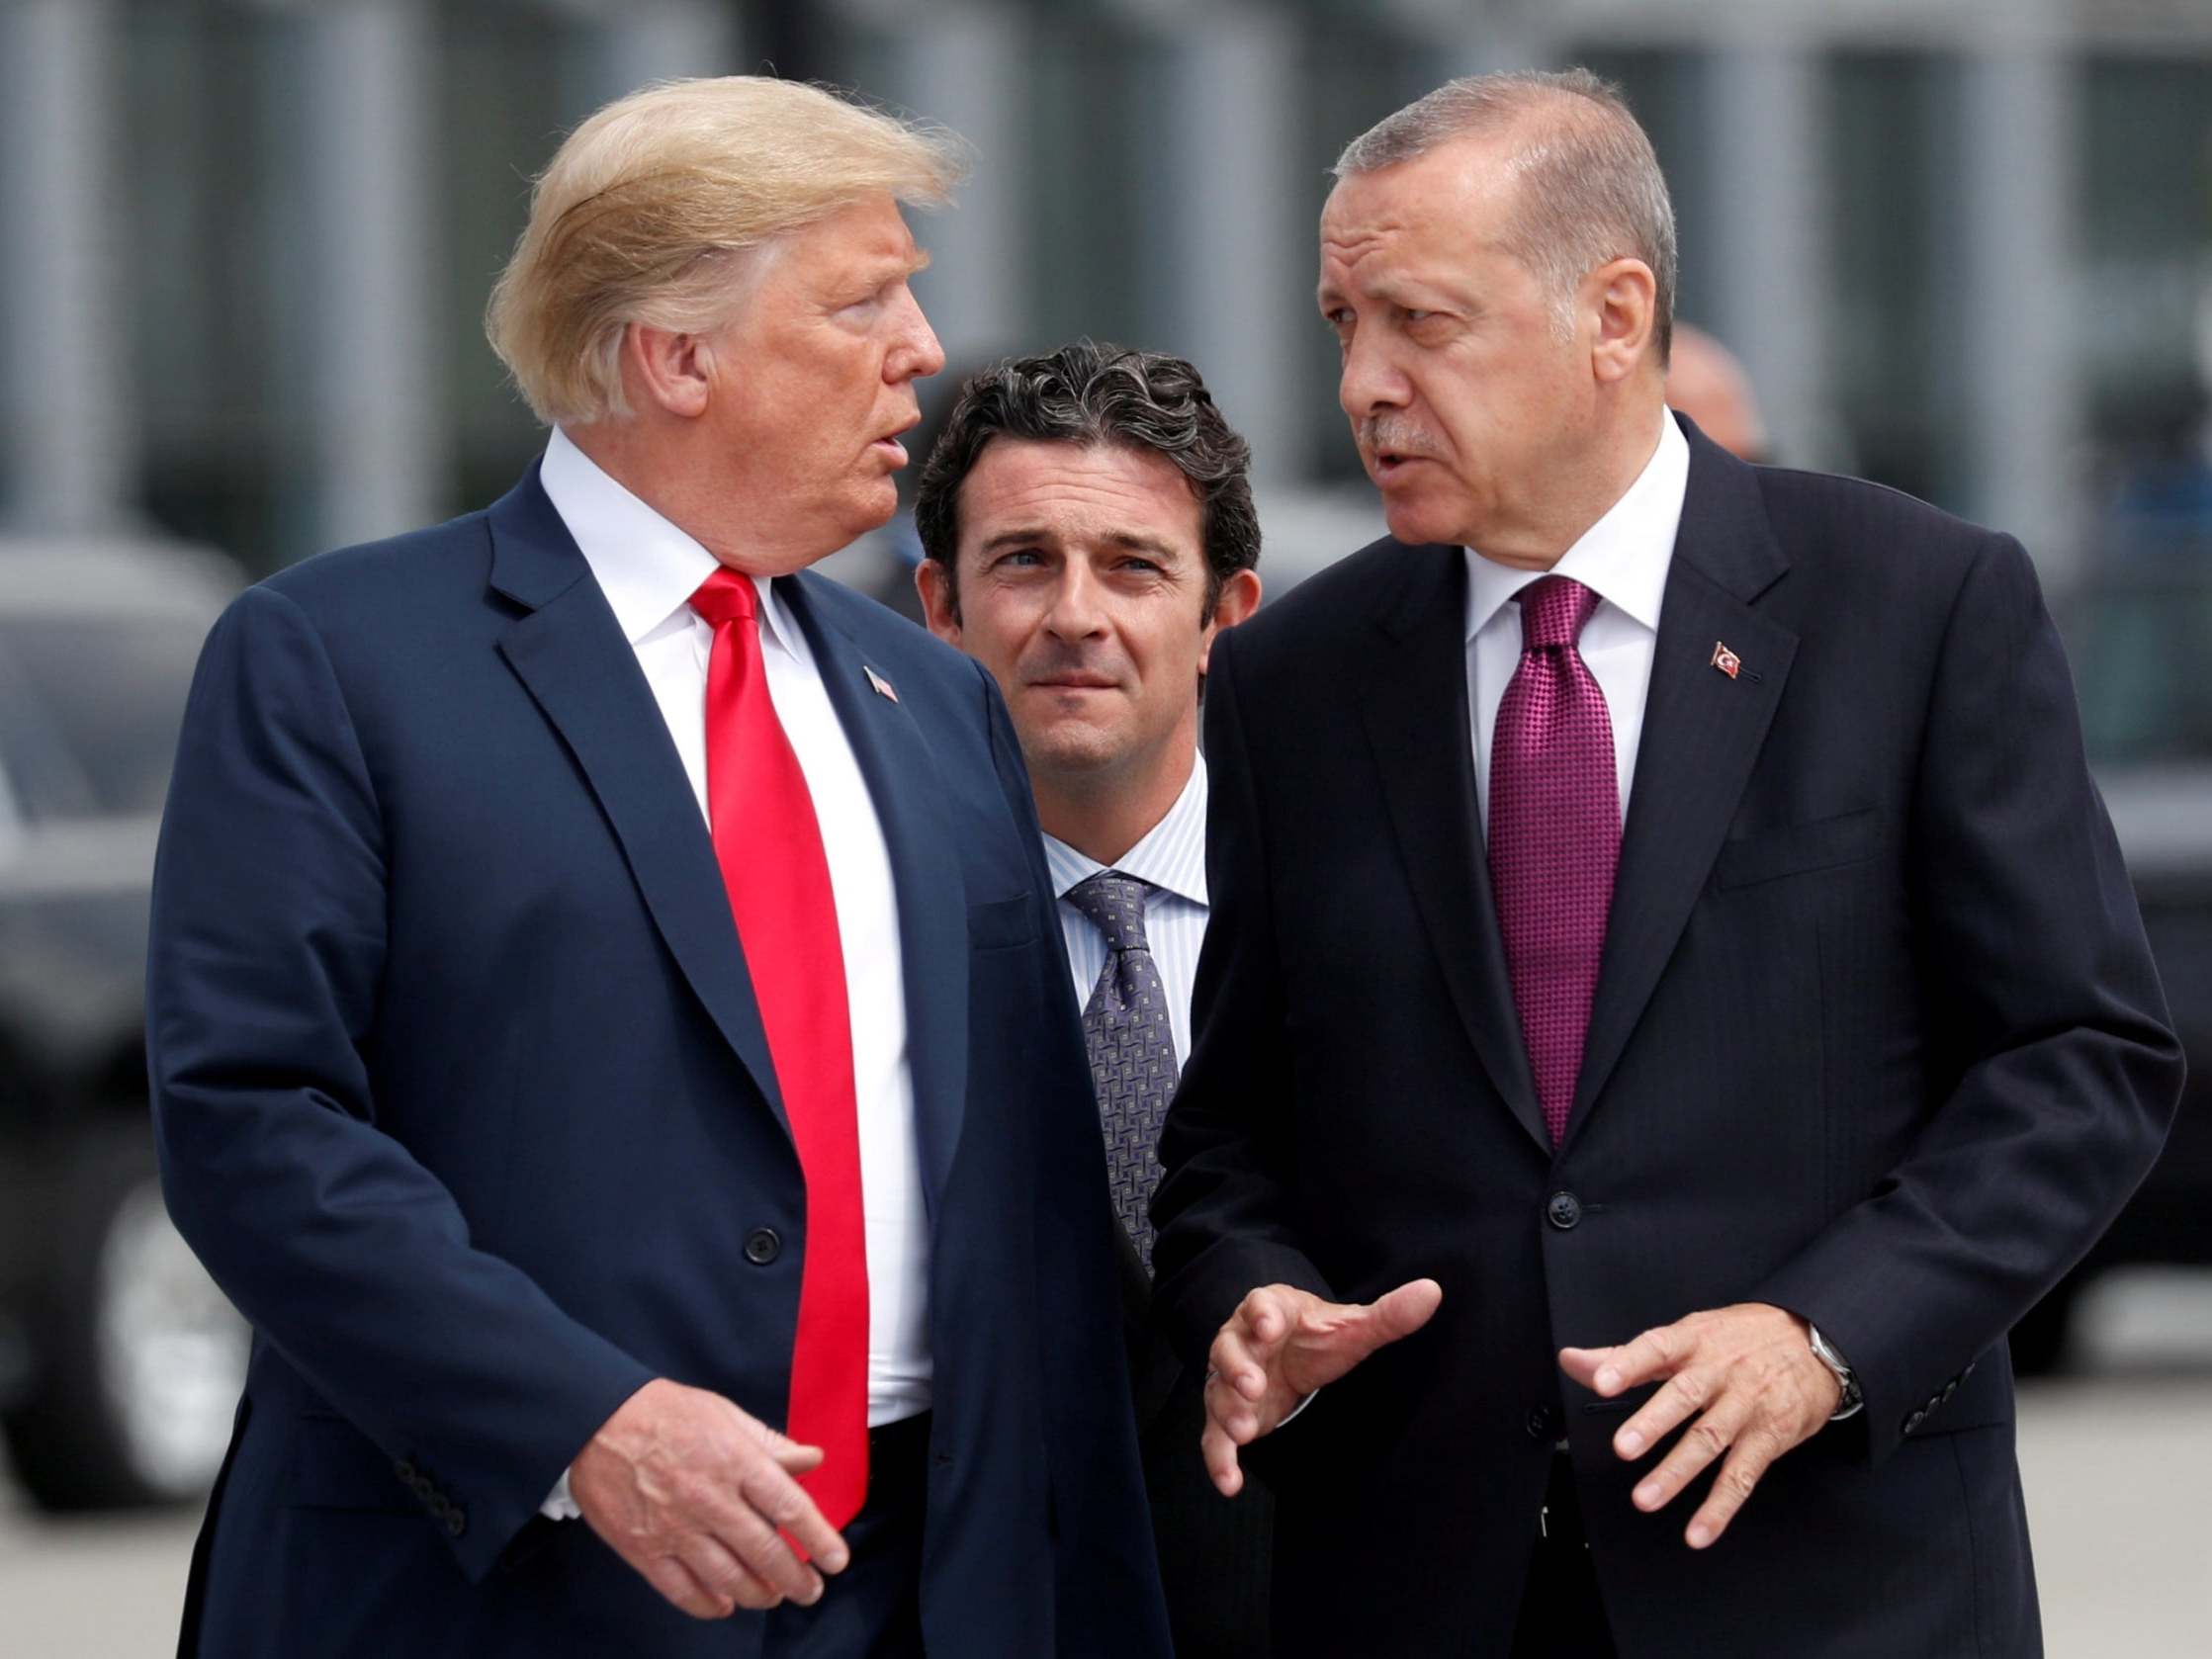 Trump and Erdogan’s actions have threatened the bloc’s stability